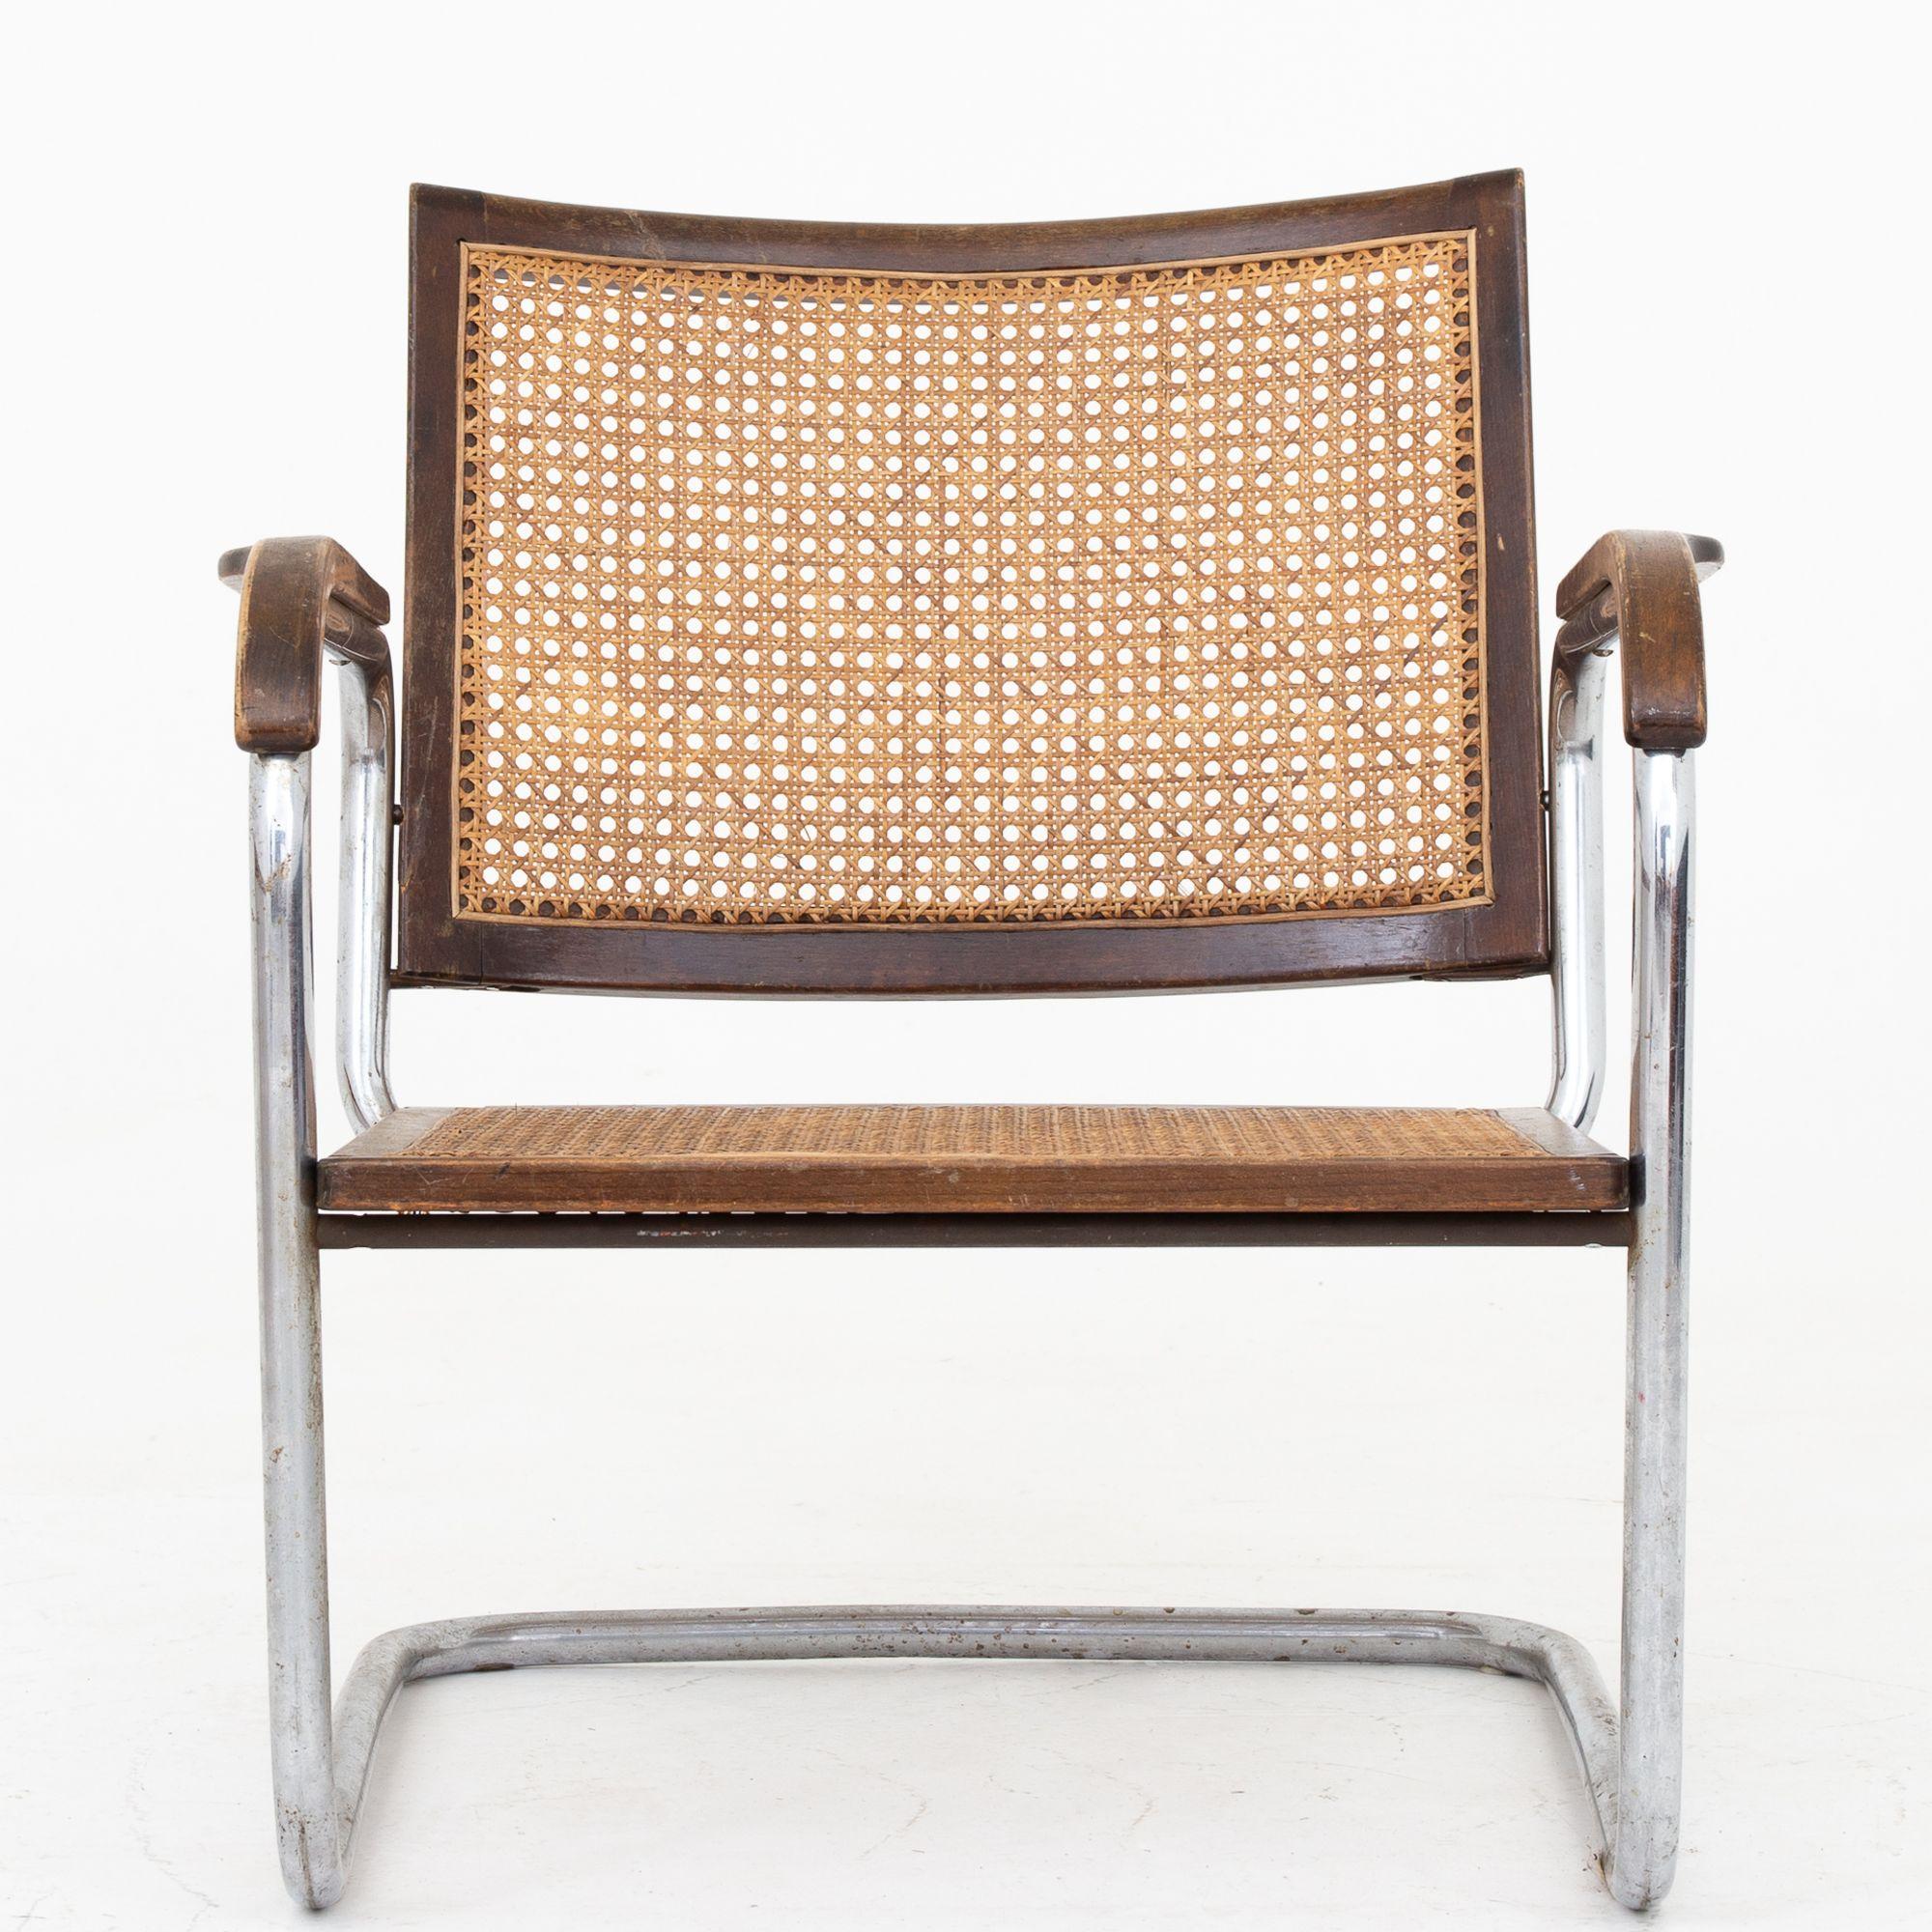 Rare pair of armchairs (model S102) made of metal, original French cane and stained beech from the 1930s.
Literature: 'Nyt Tidskrift for Kunstind. Maker Fritz Hansen.